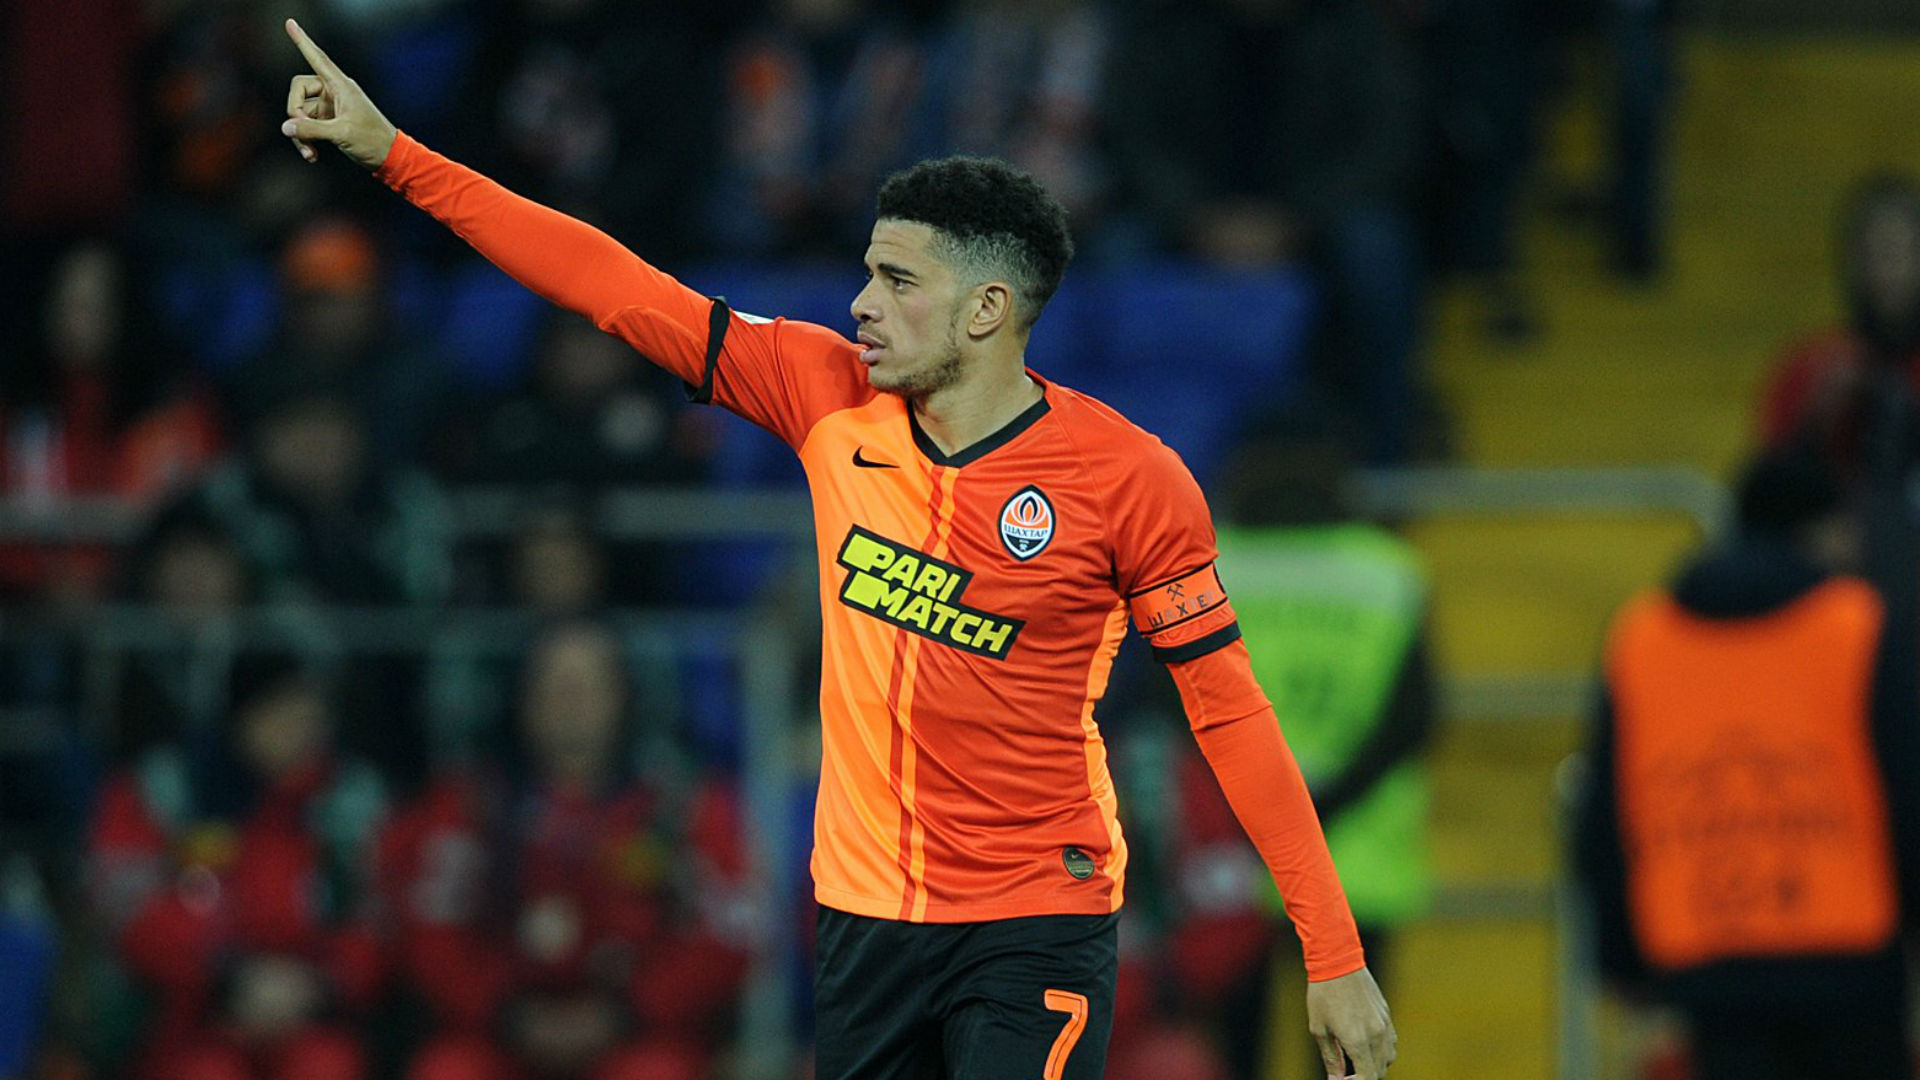 Shakhtar Donetsk Star Taison Sent Off For Reacting To Racist Abuse From Dynamo Kiev Fans